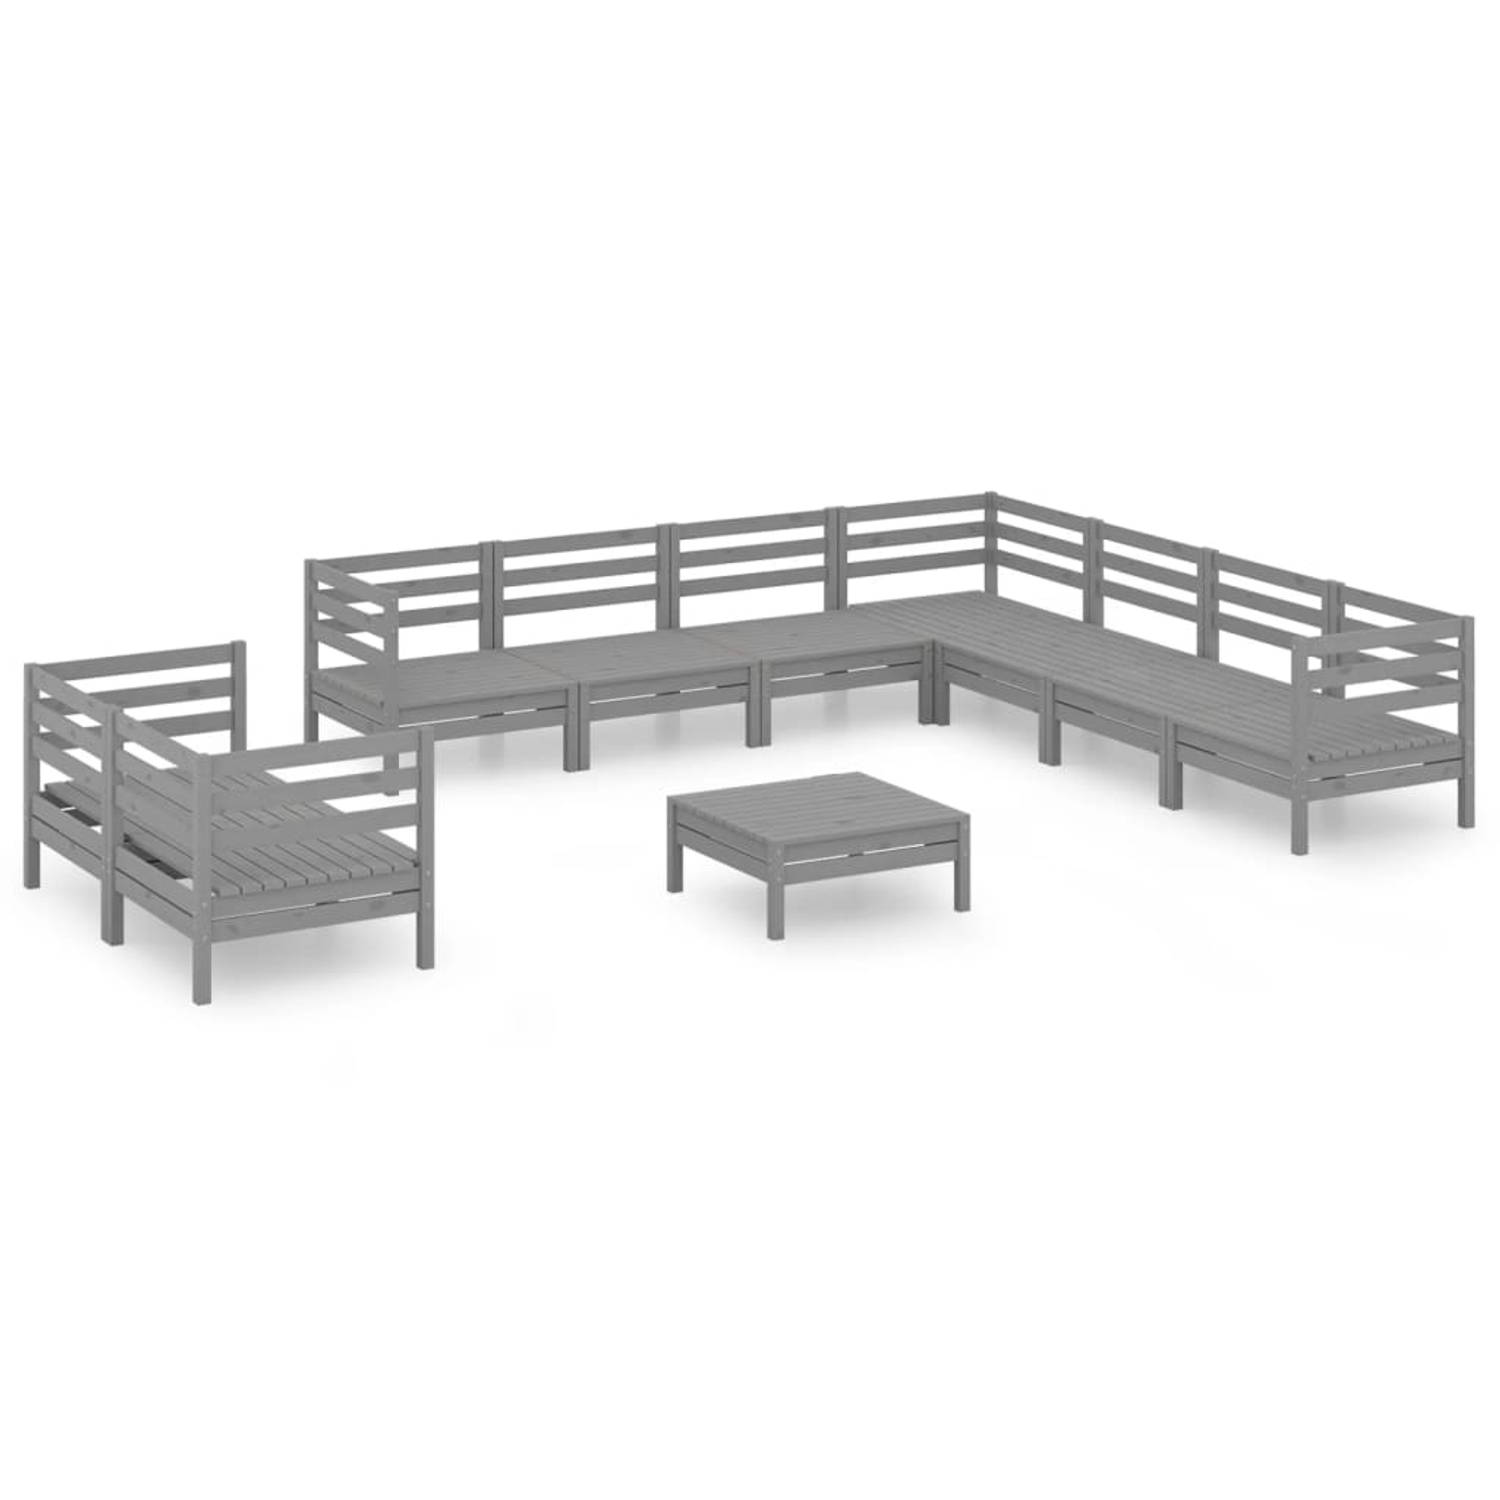 The Living Store 10-delige Loungeset massief grenenhout grijs - Tuinset